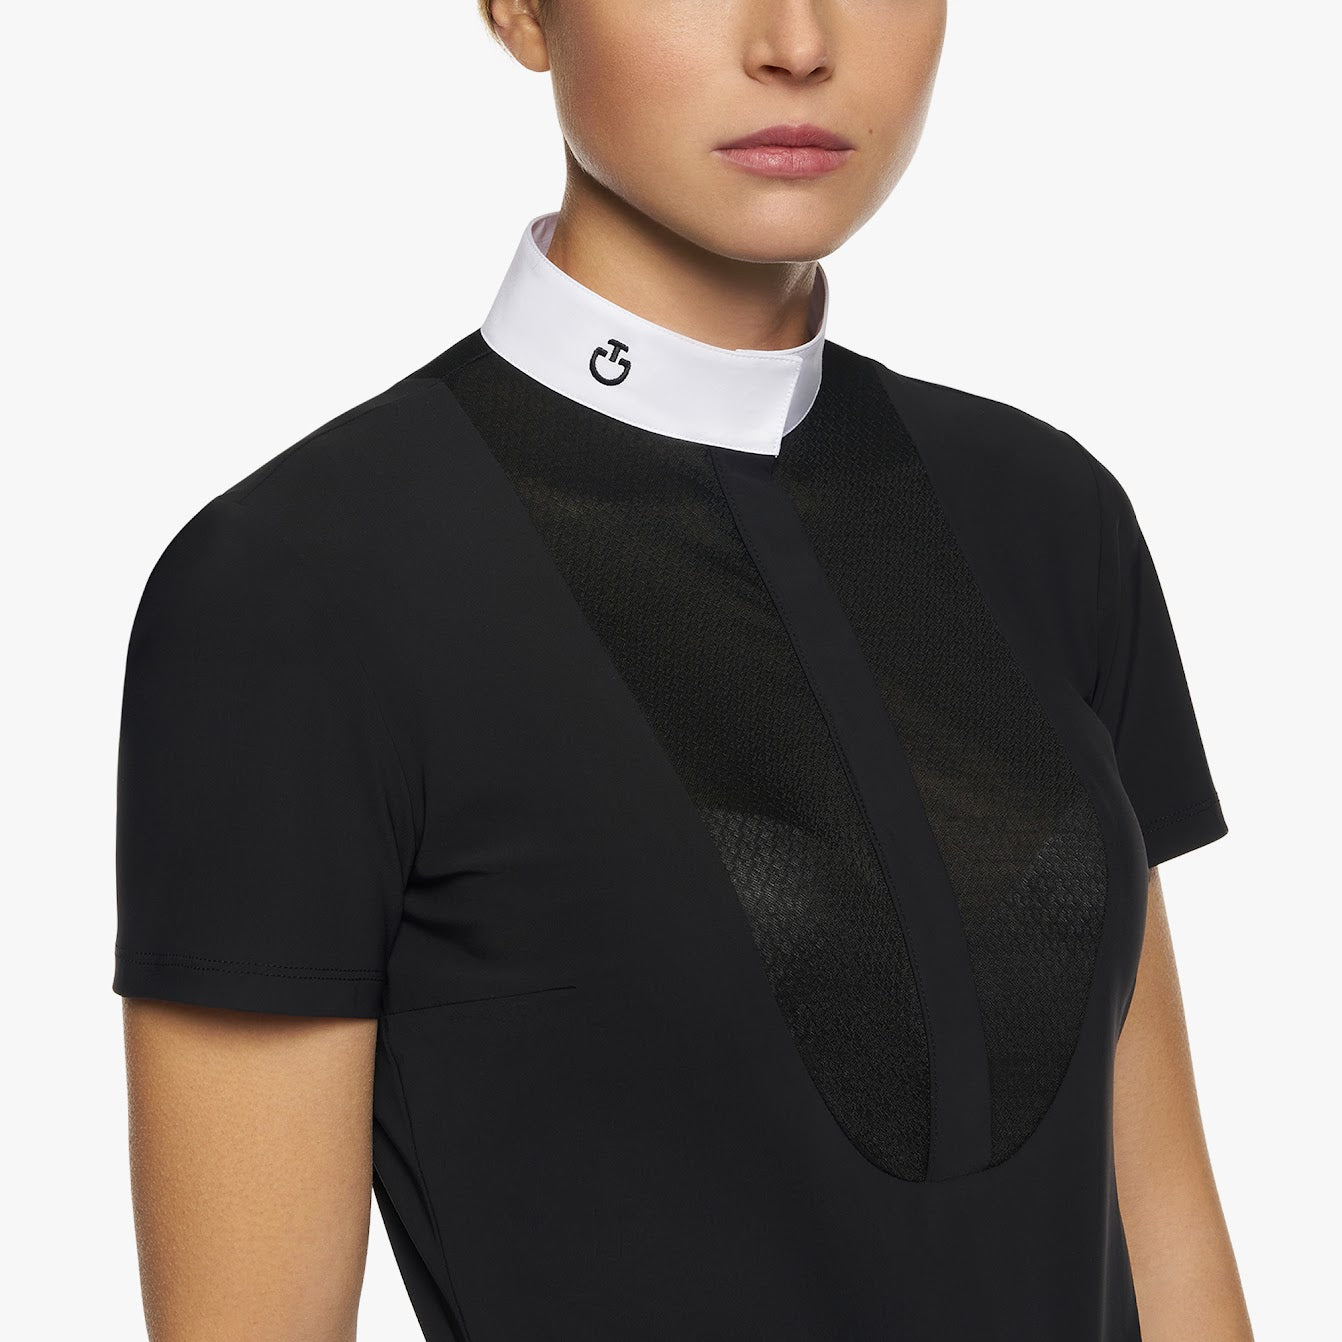 We love this Cavalleria Toscana black Lacy Drop S/S Show Shirt. The subtle semi sheer bib front and back is stunning. front placket button opening with the iconic CT logo embroidered on the collar. A must have for this season.